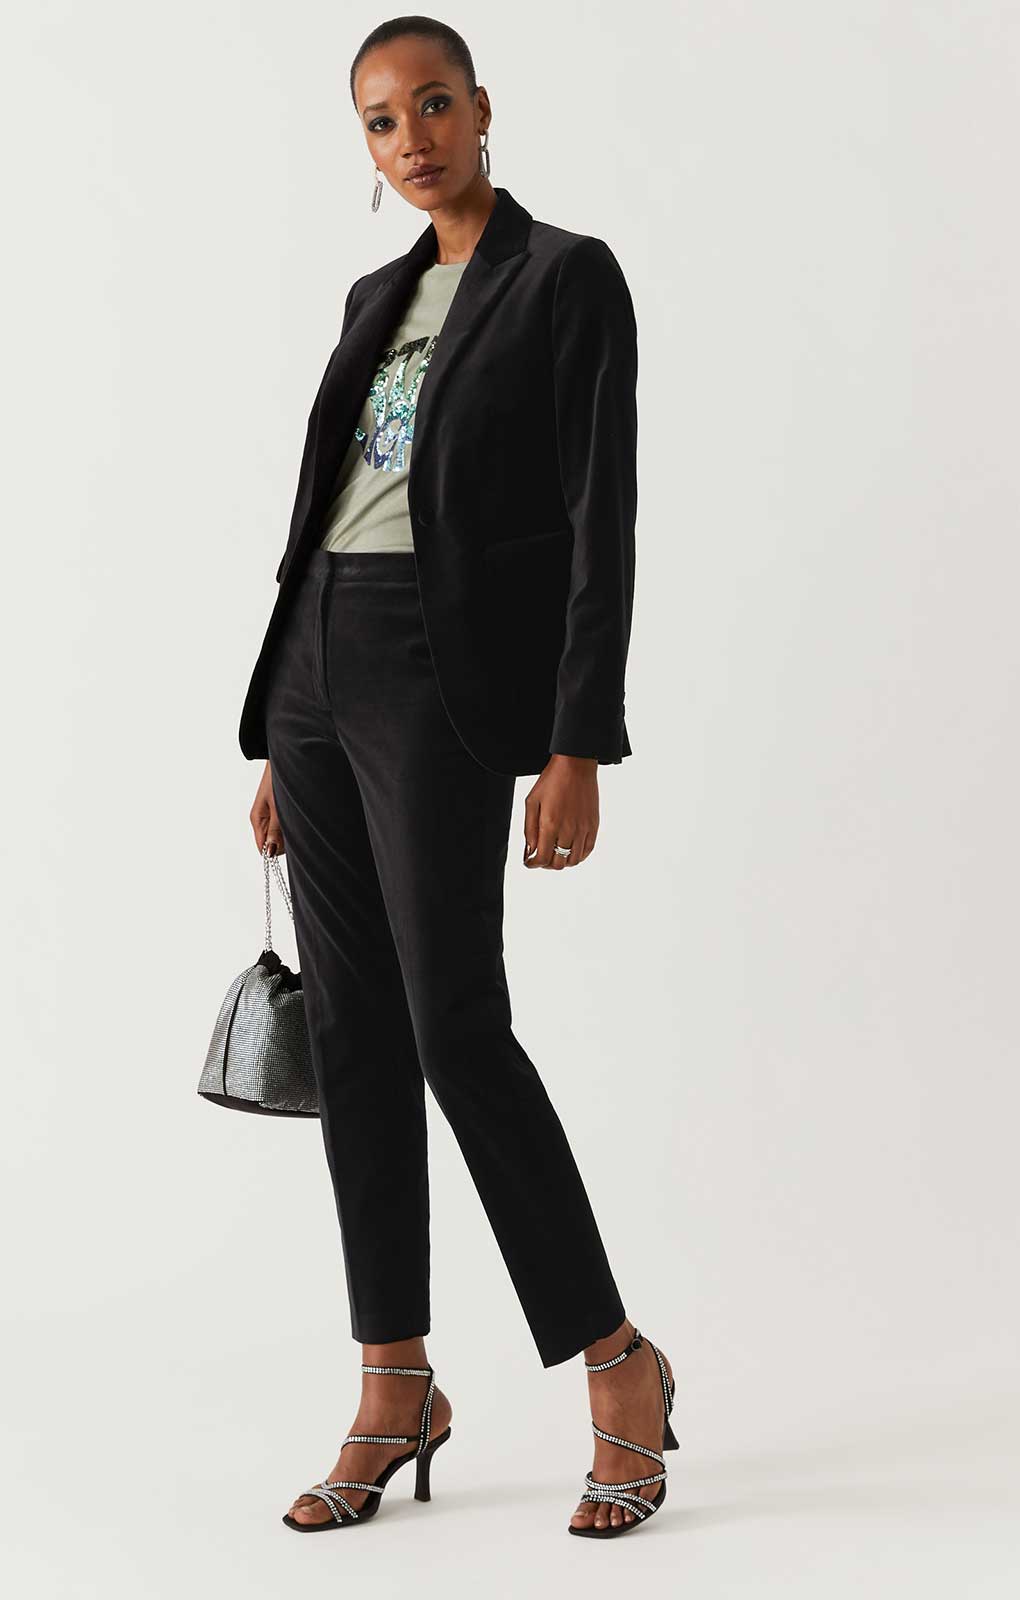 M&S Cotton Velvet Suit in Charcoal product image